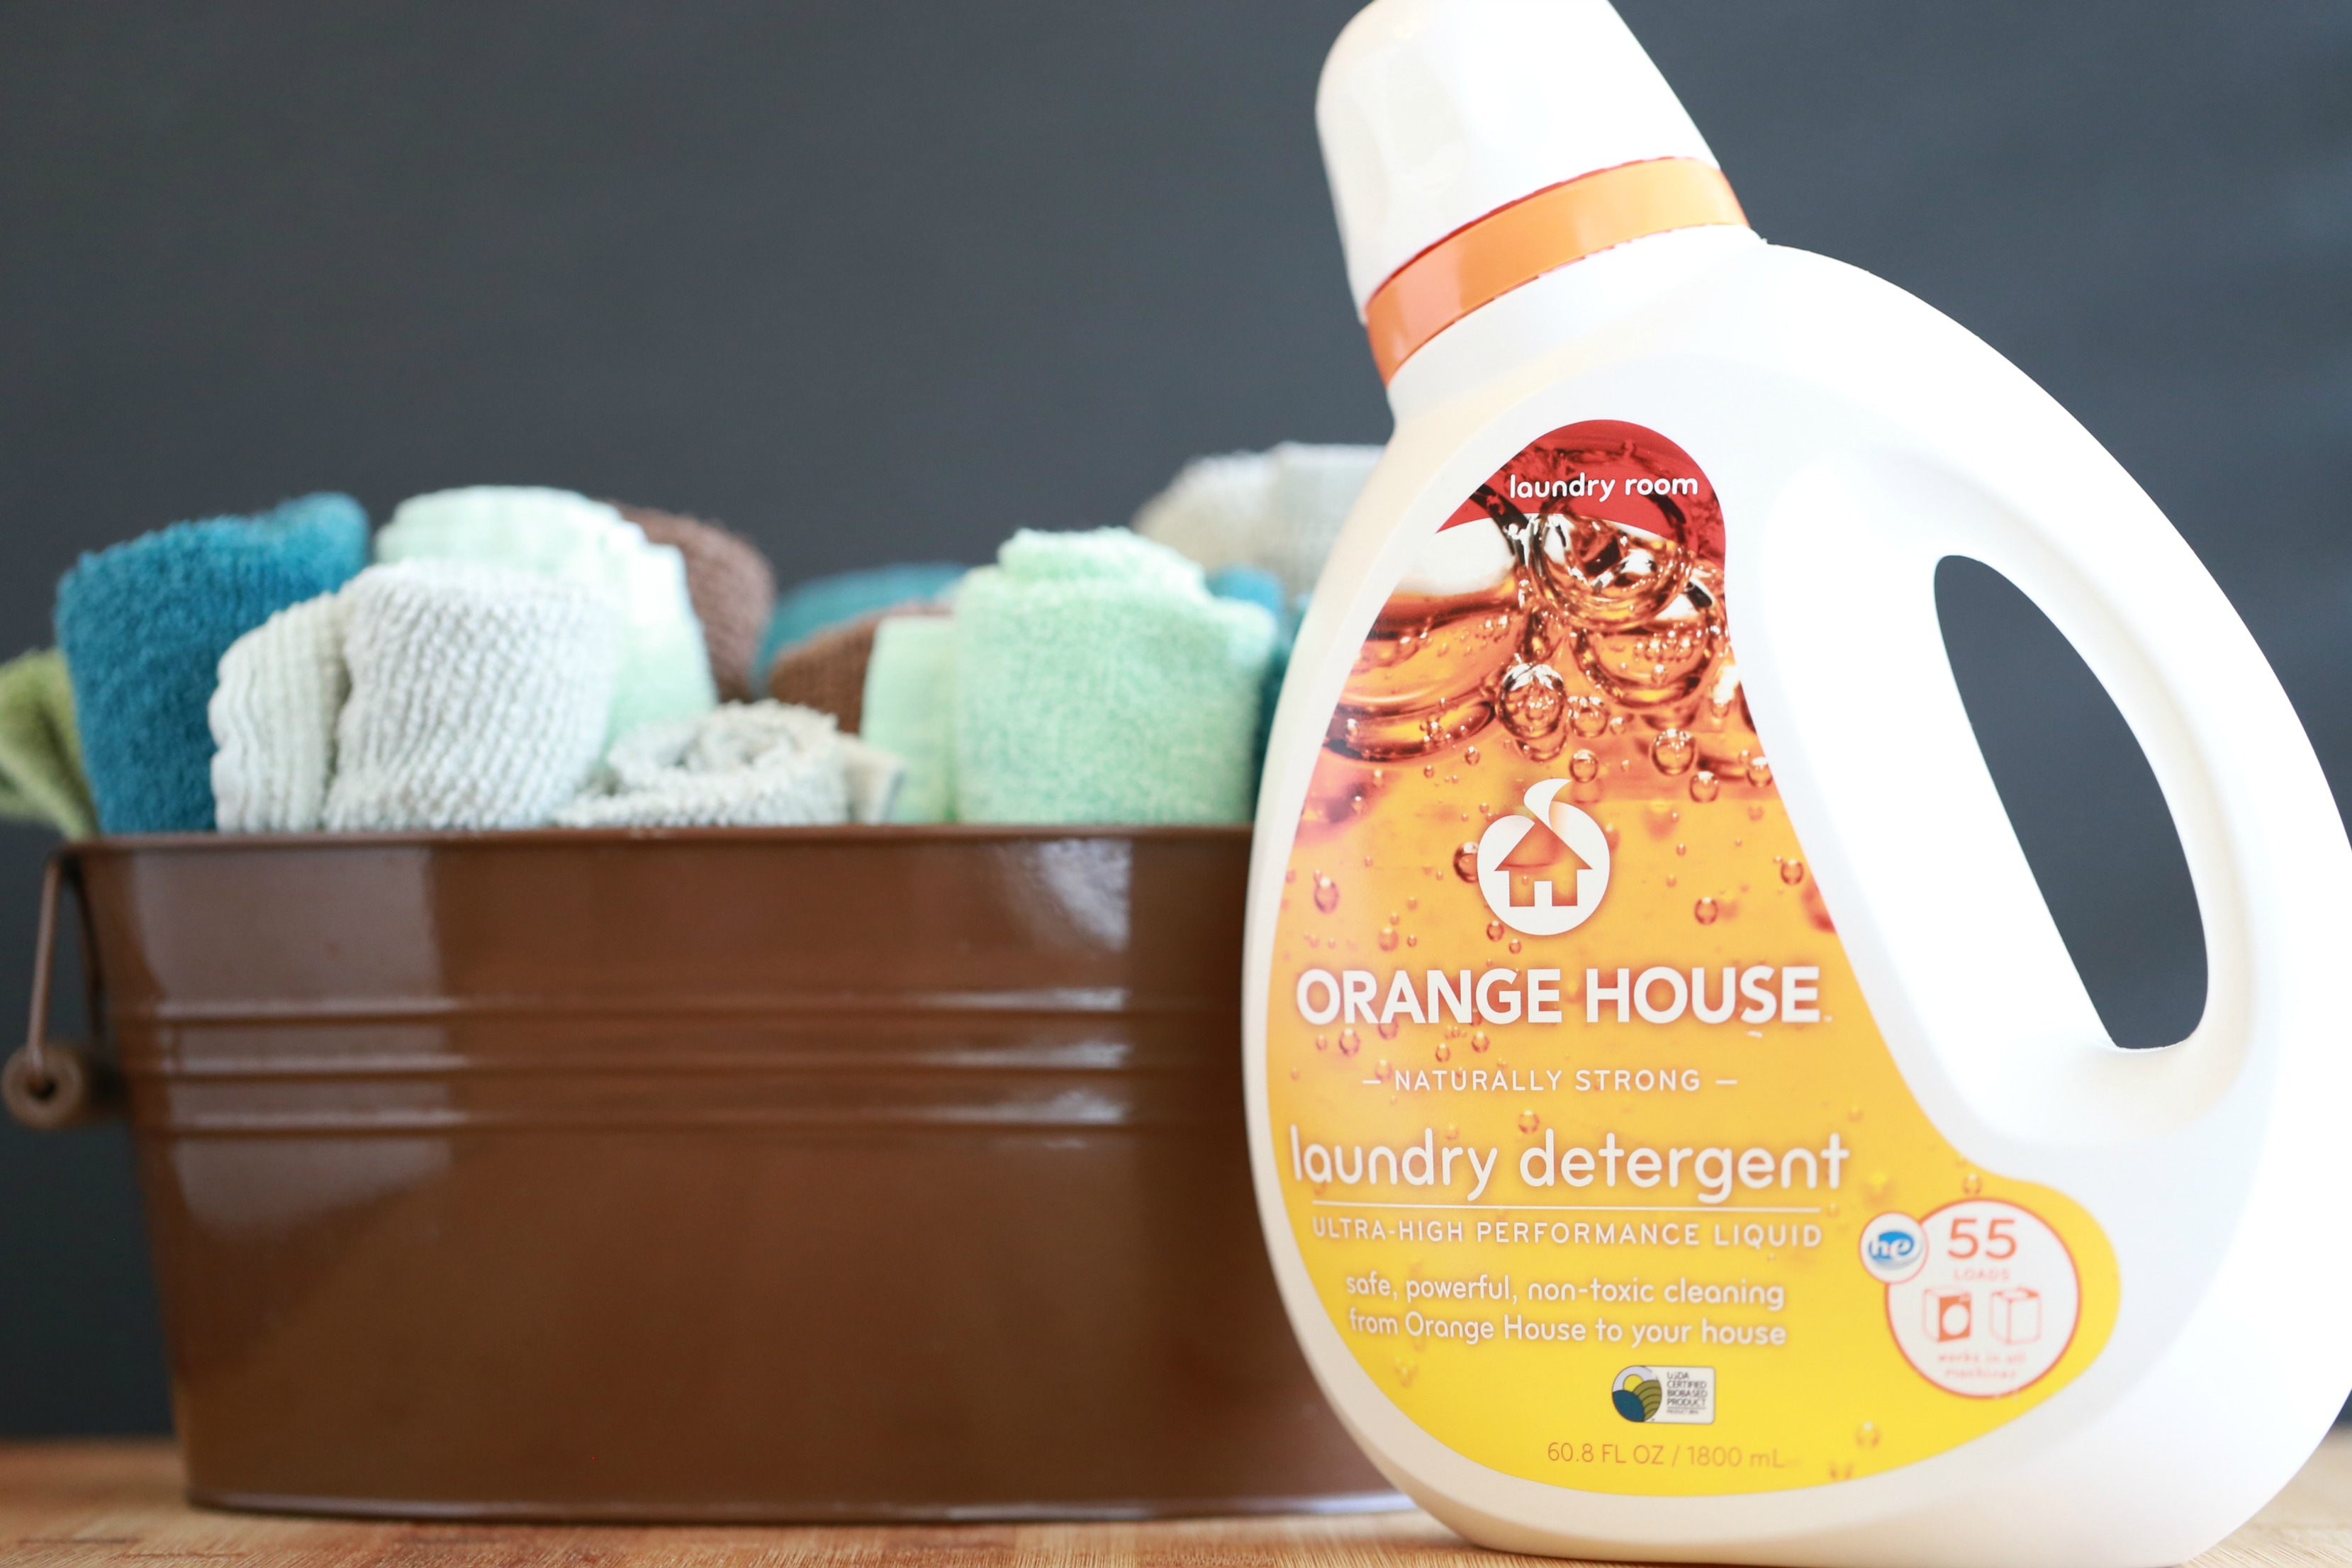 When keeping a clean home is a top priority, naturally strong cleaning products matter. Take the Orange House Challenge and see for yourself.